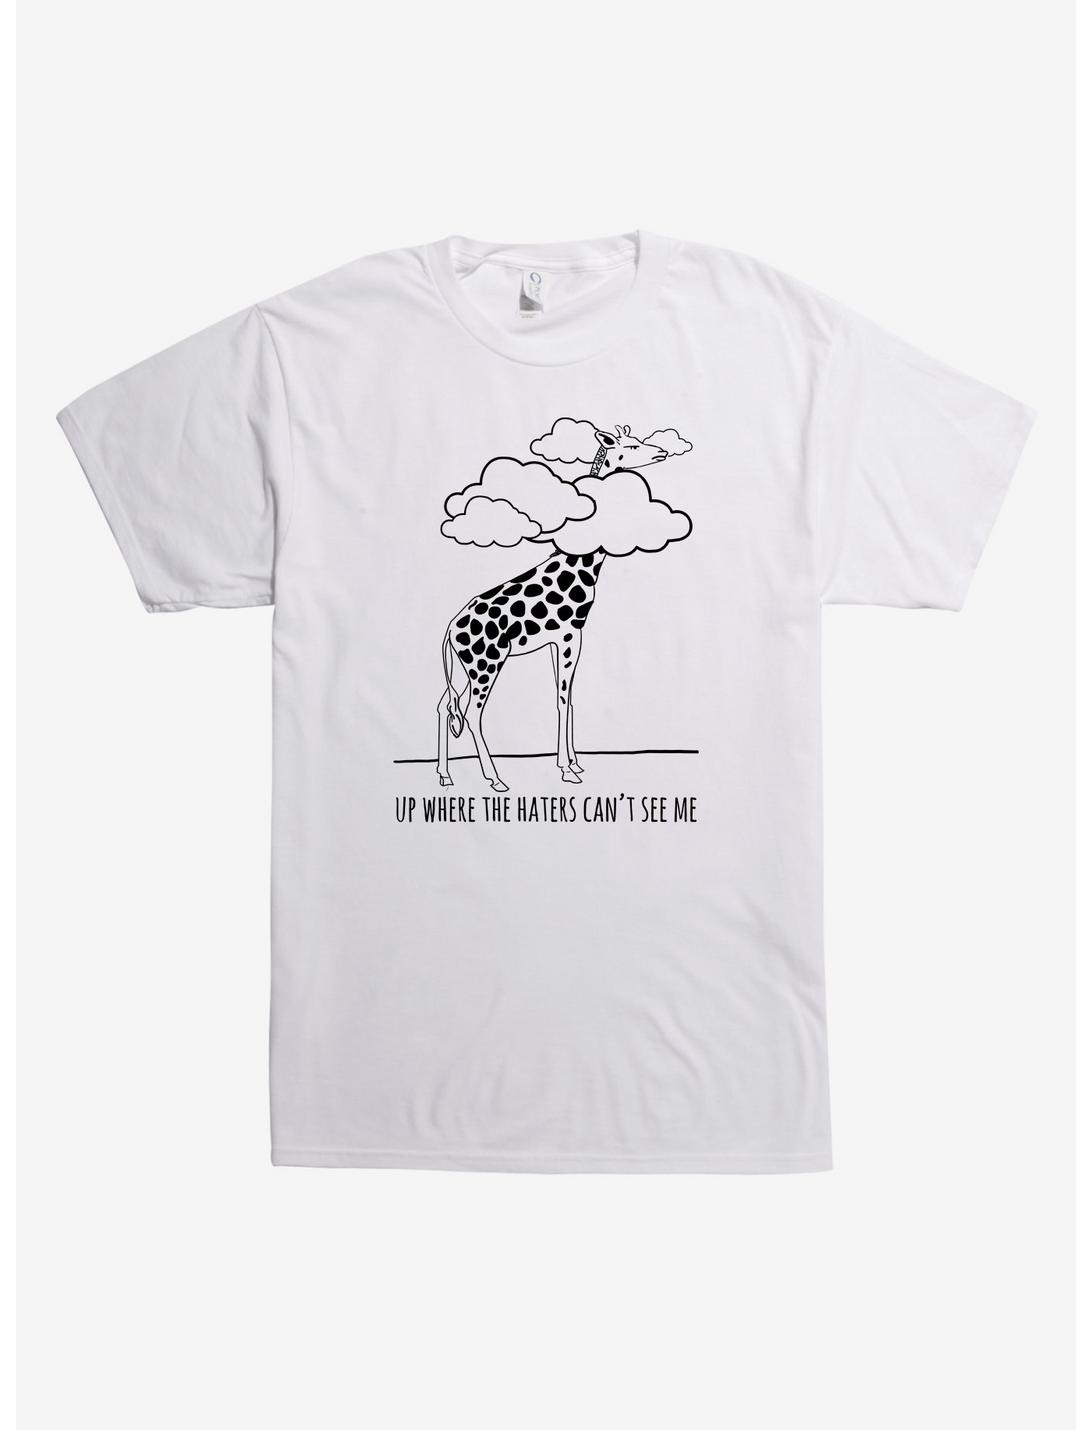 Haters Can't See Me Giraffe T-Shirt, WHITE, hi-res